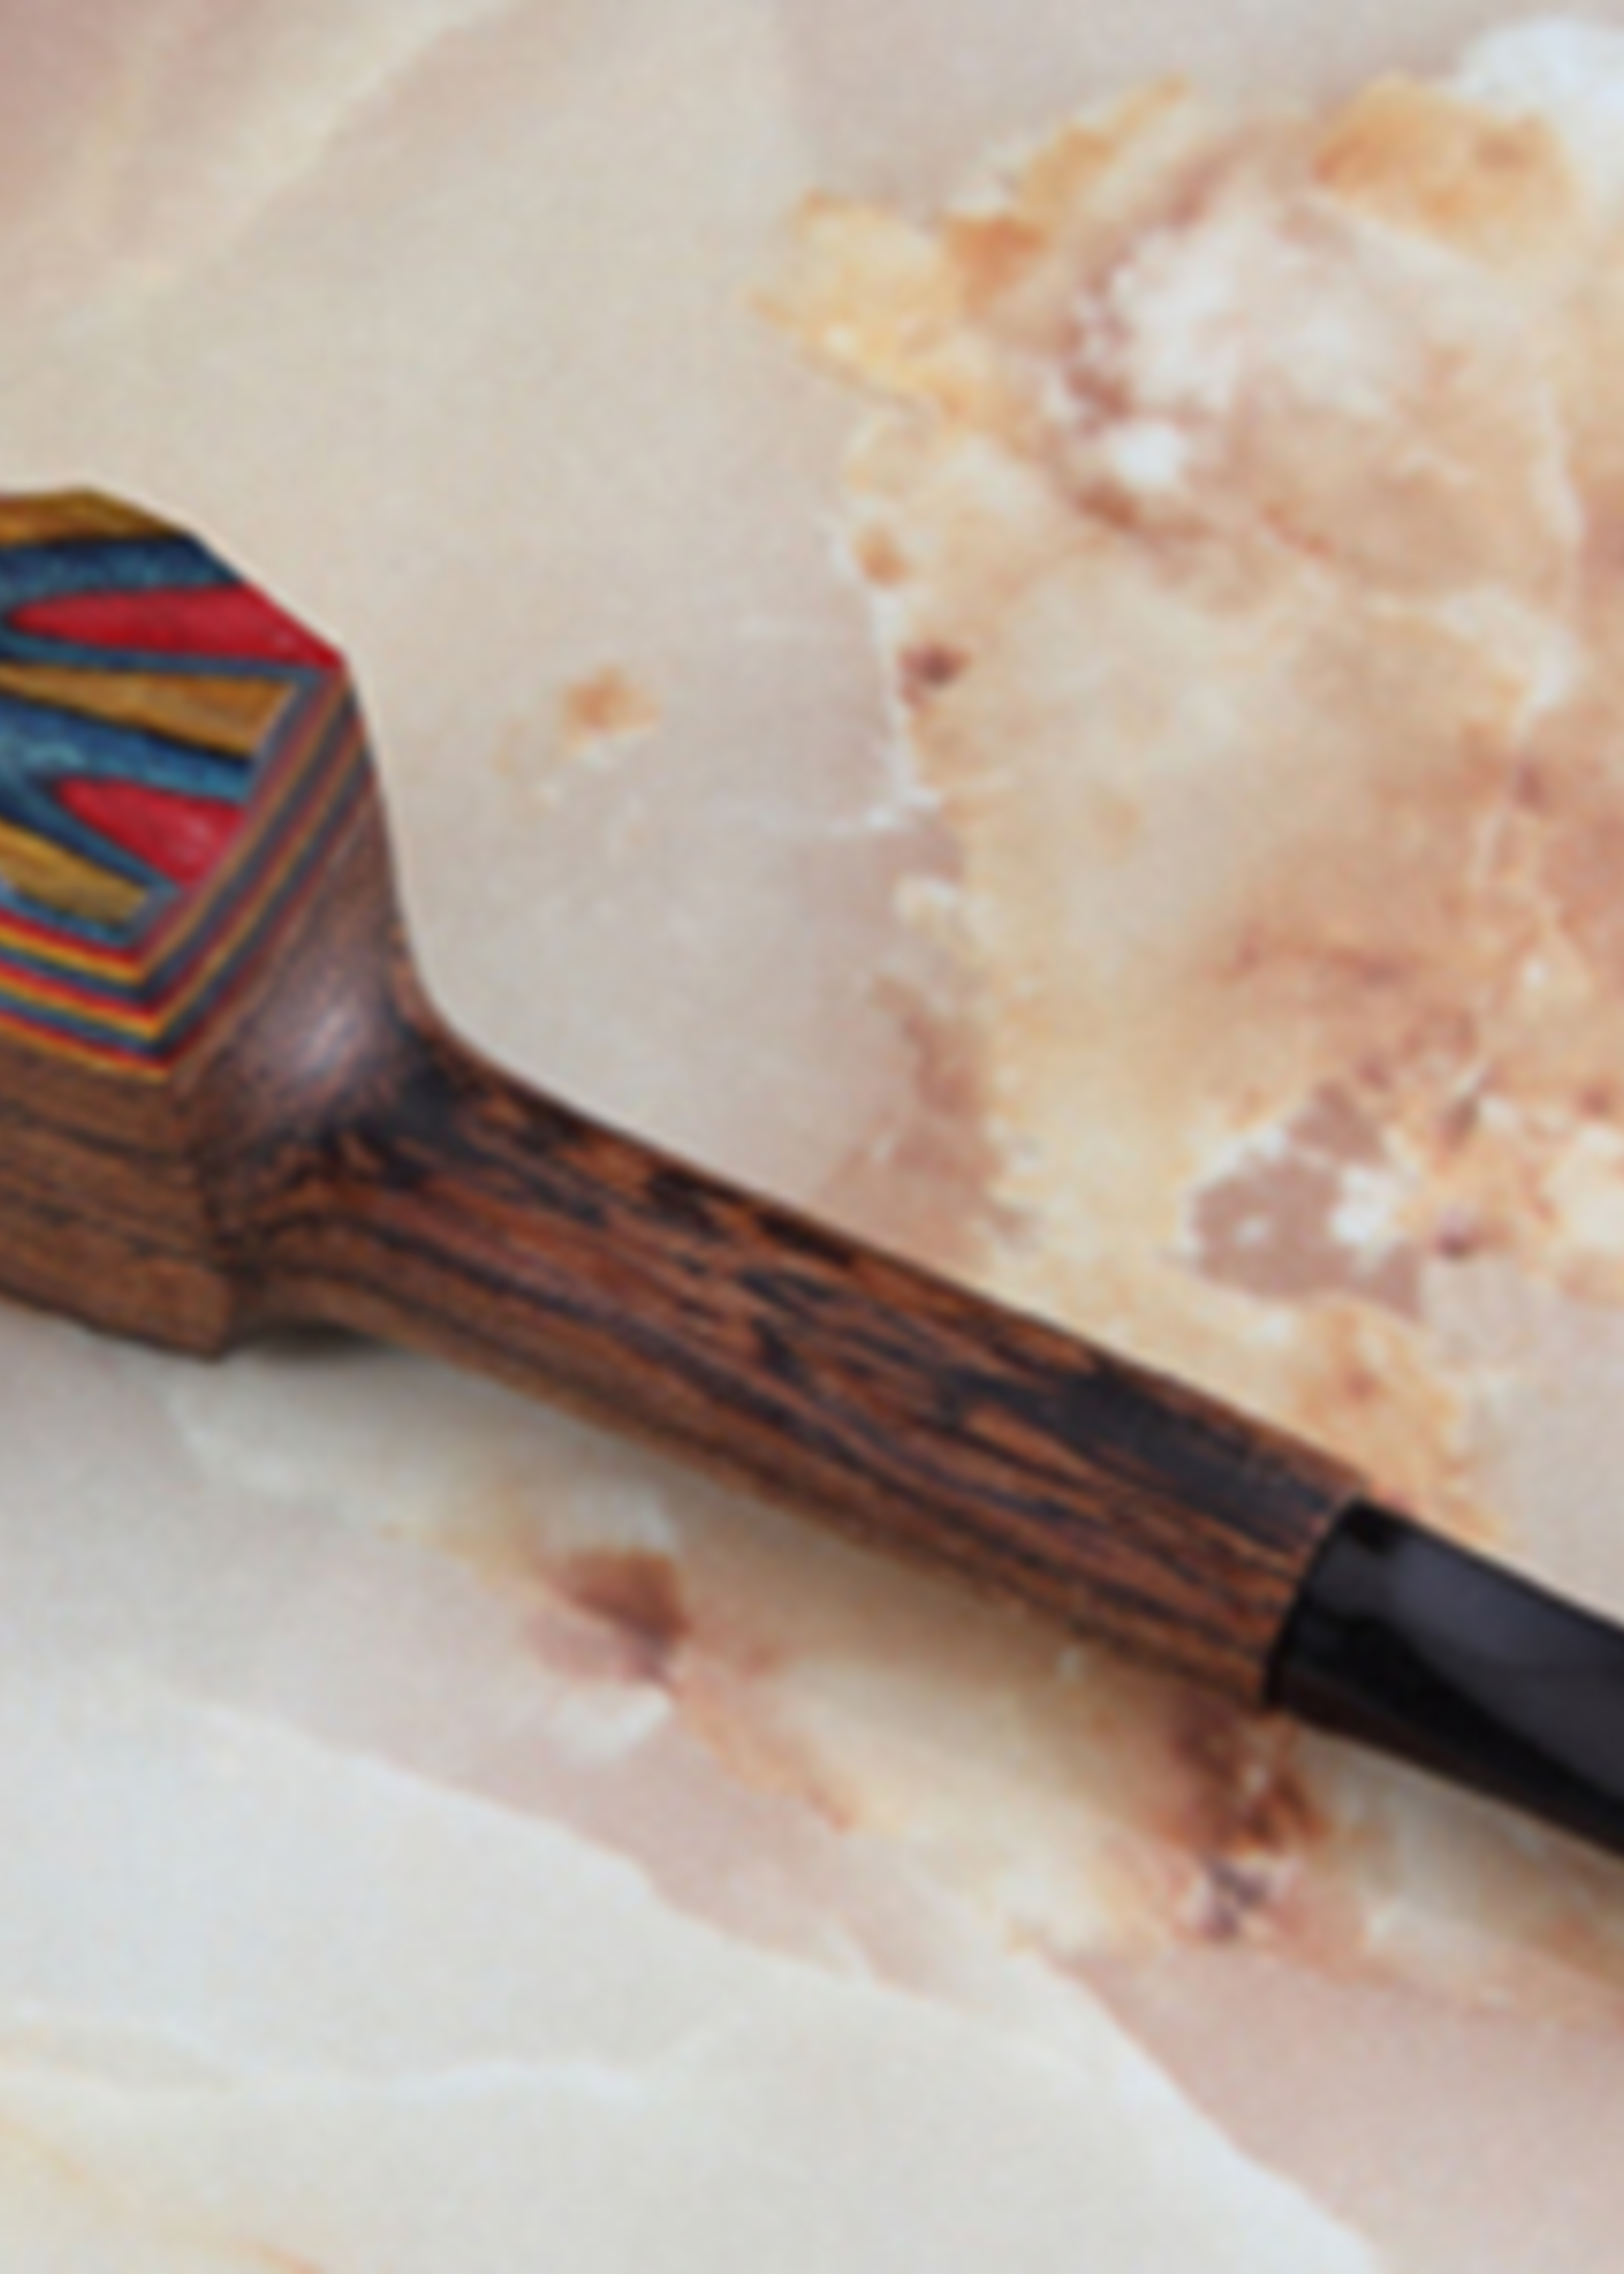 THE MILL Exotic Wood 4" Pipe W/ Diamond Wood Cap